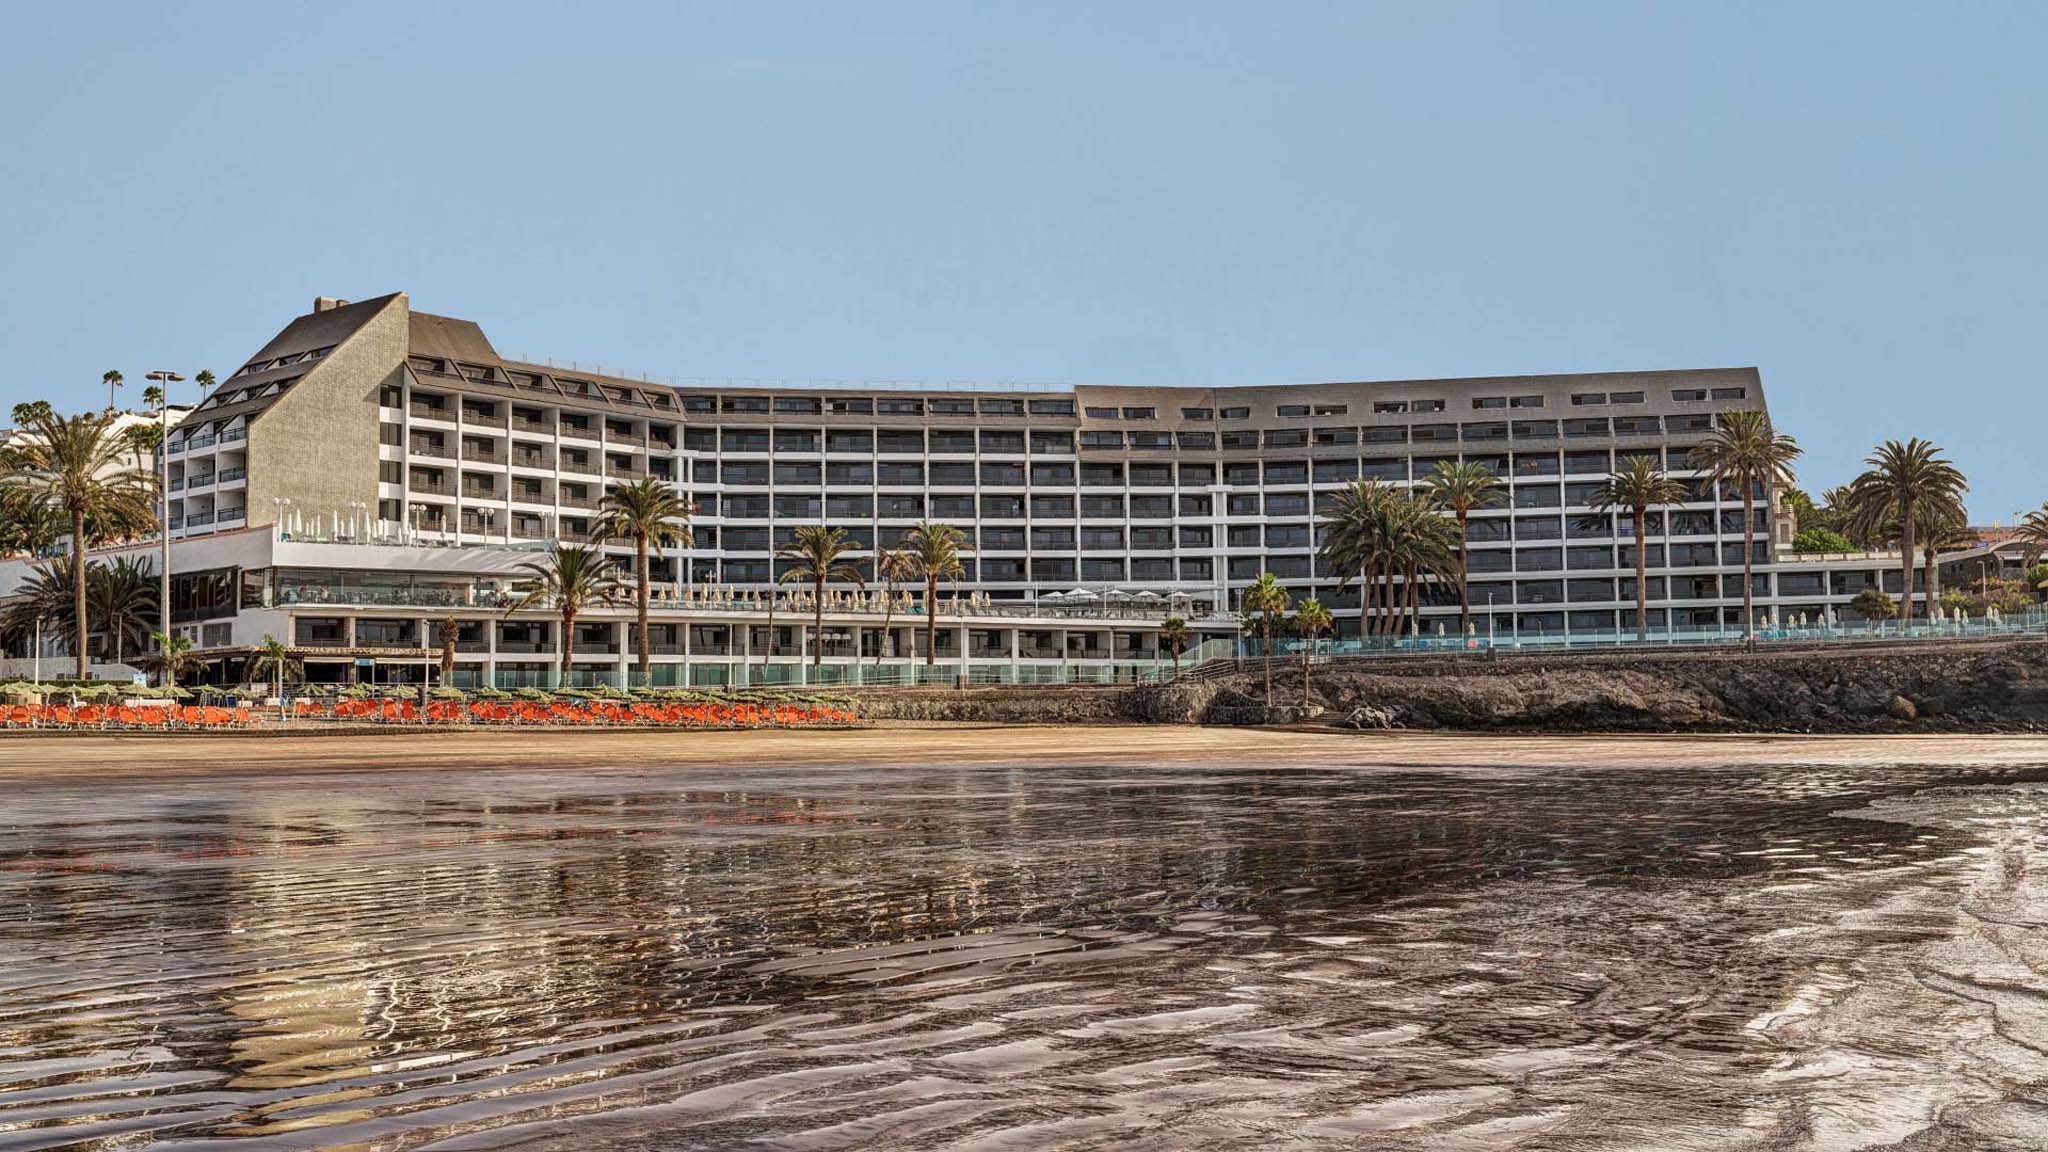 View from the ocean towards Hotel Don Gregory by Dunas, Gran Canaria, Canary Islands